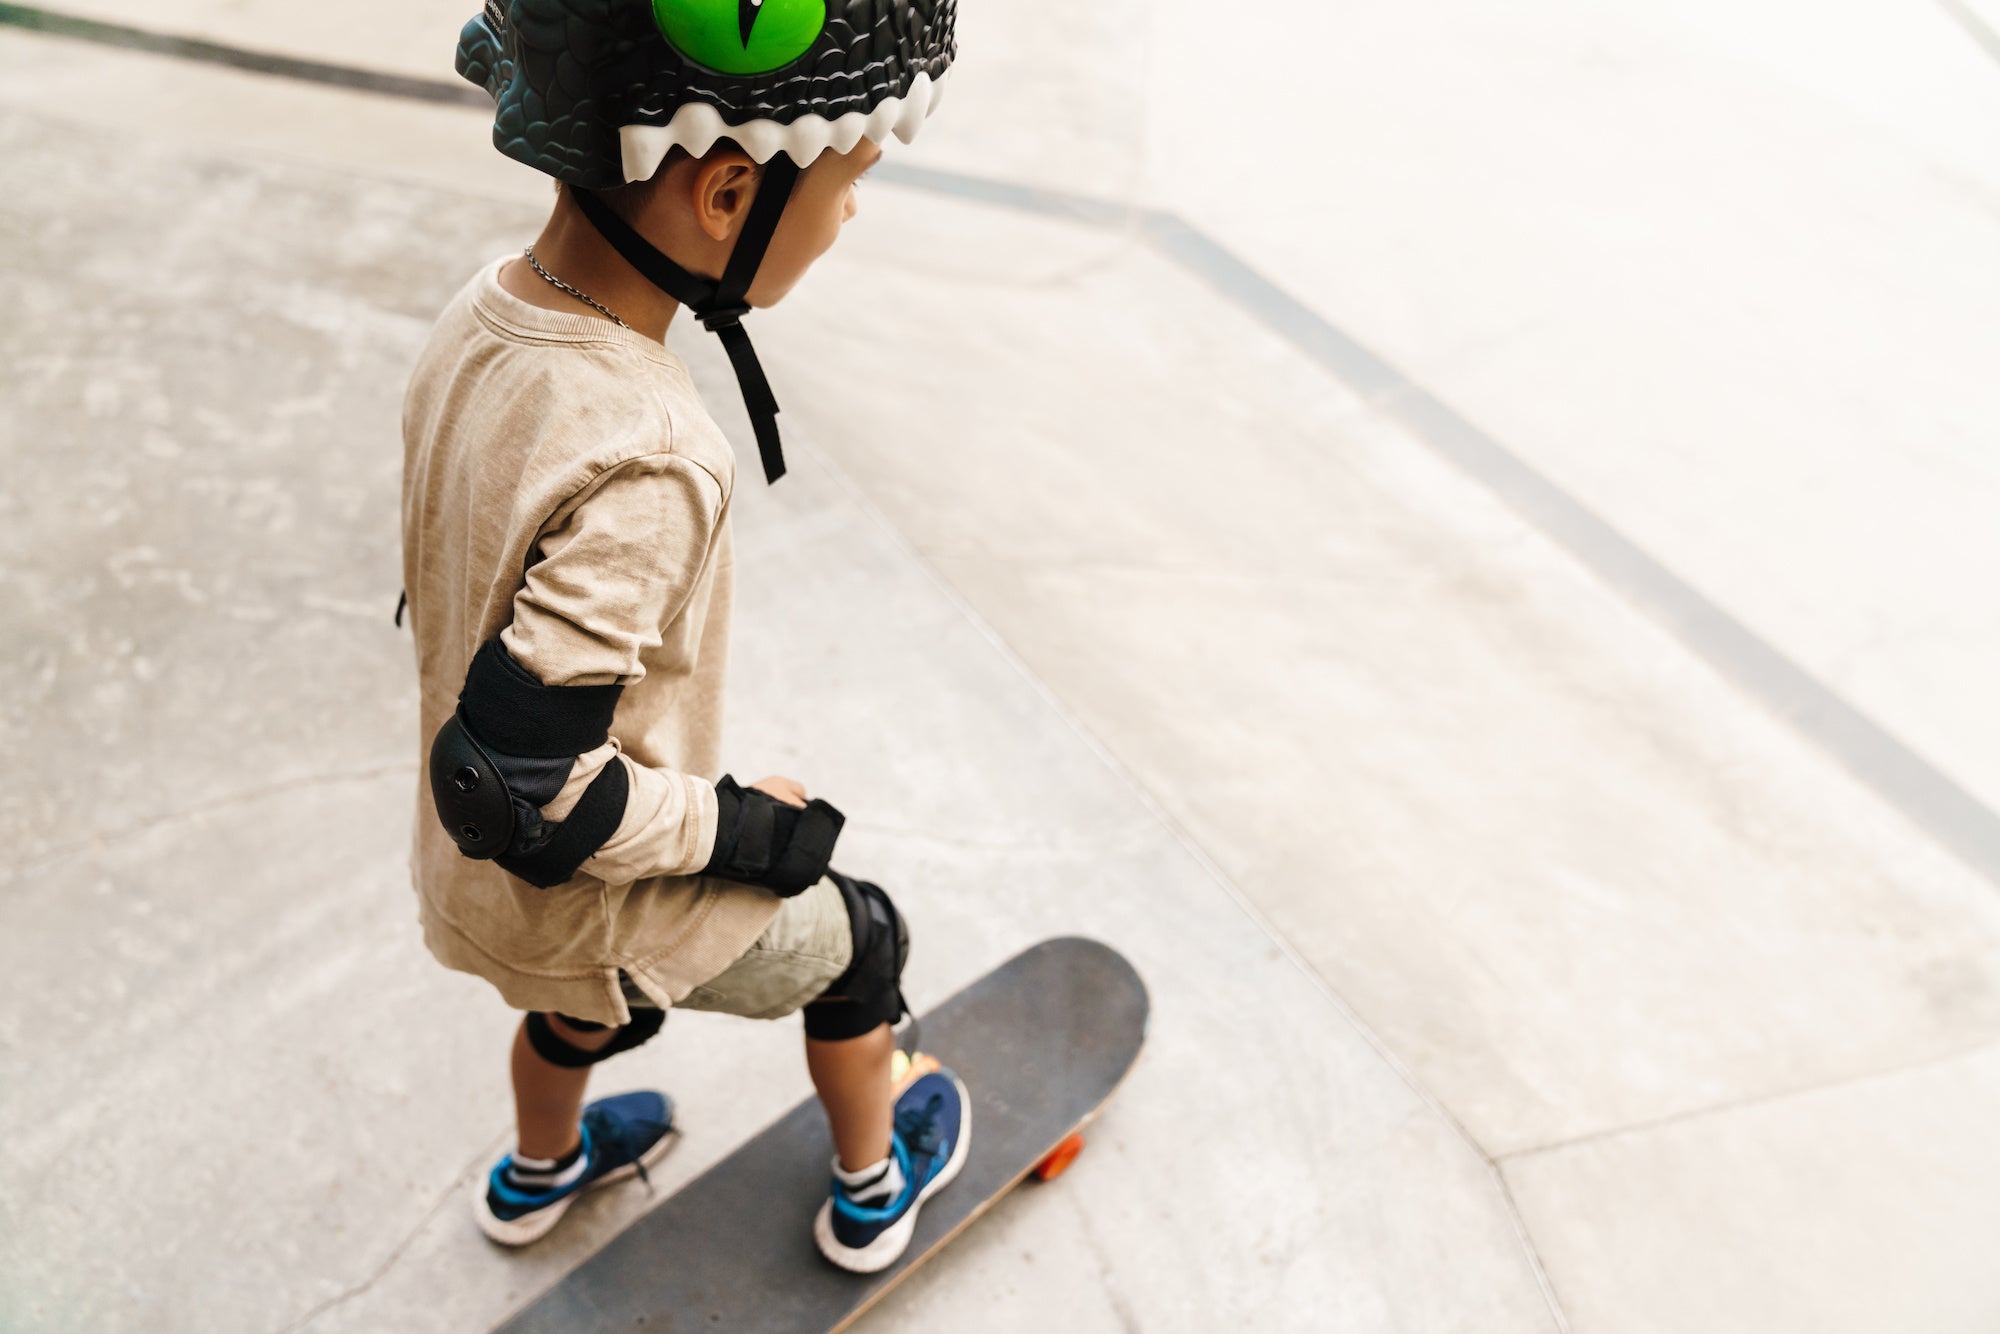 Why Skateboards Are Great for Kids